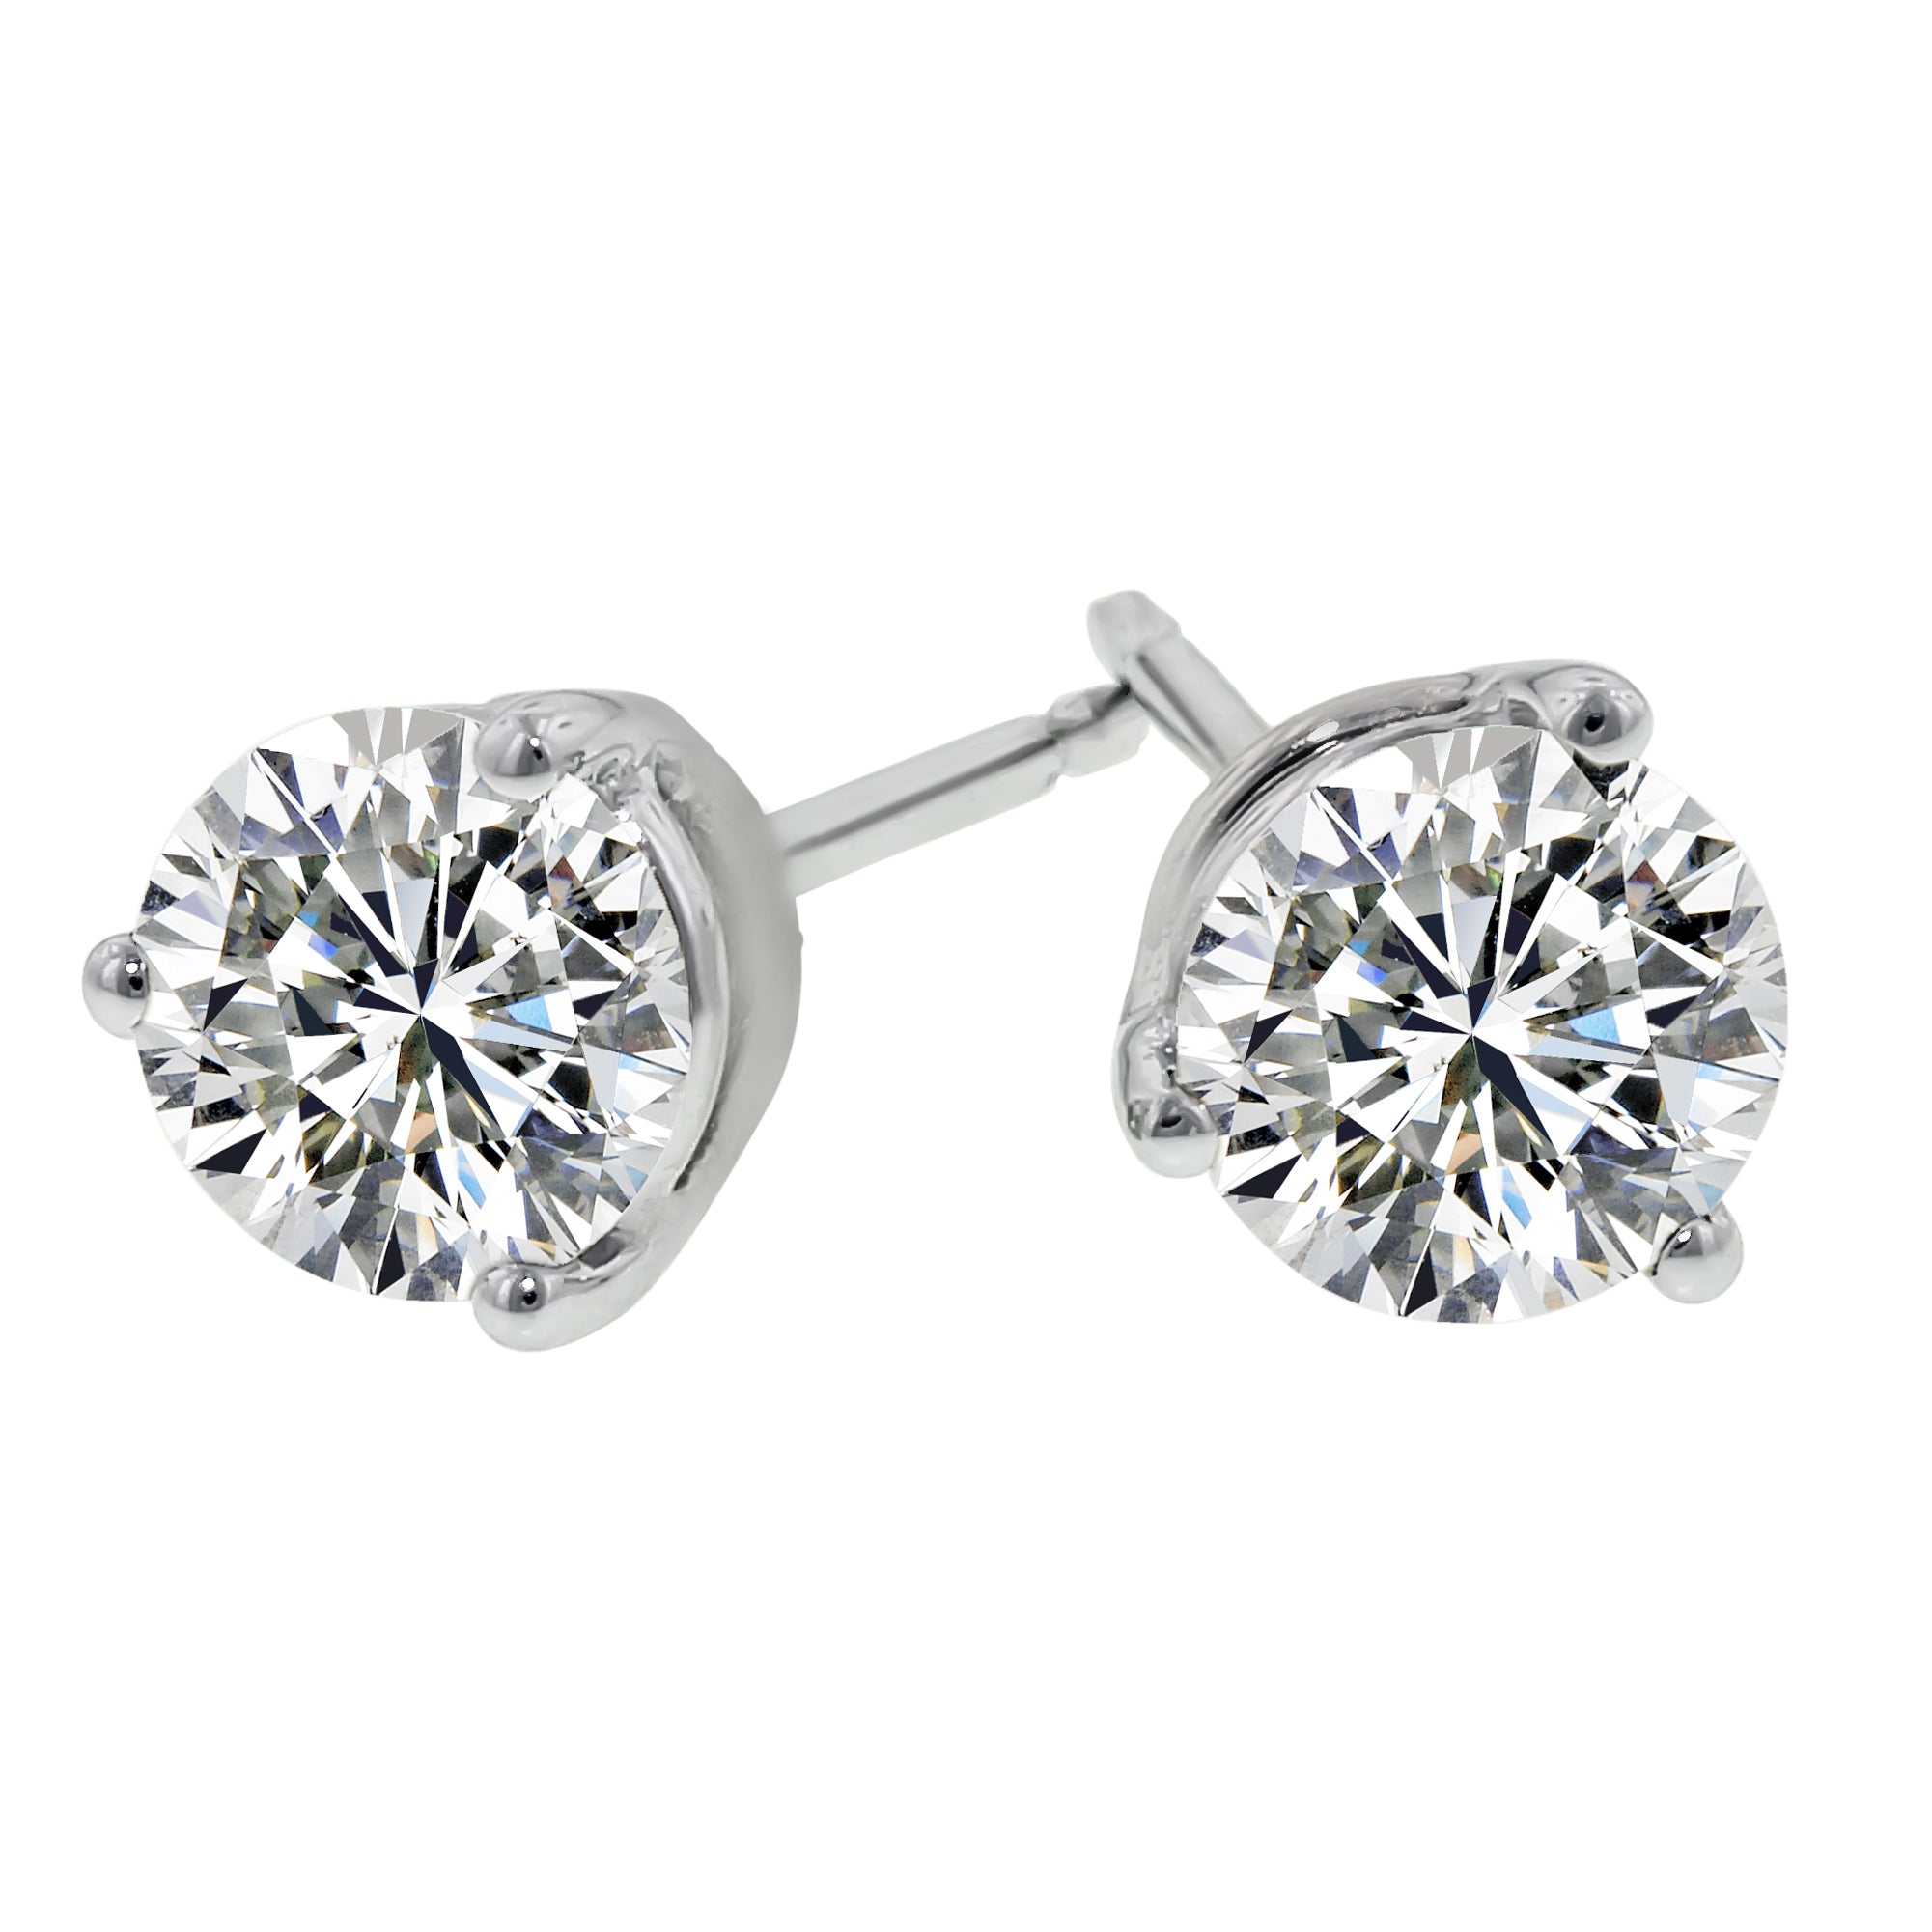 Northern Star Diamond Stud Earrings in 14kt White Gold (1ct tw)